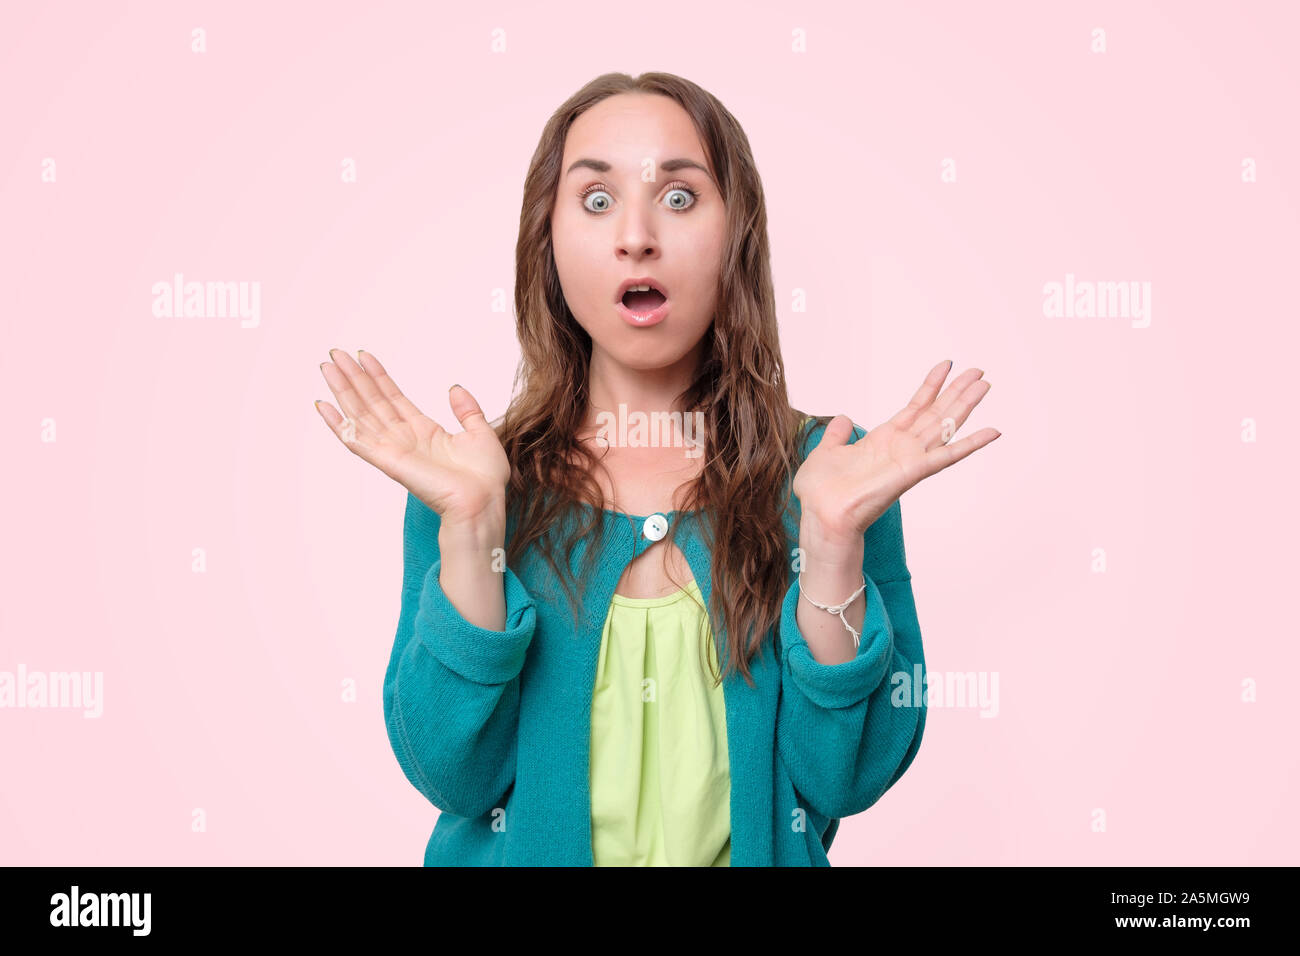 Woman with opened mouth and big eyes holding hands near face and looking happy Stock Photo